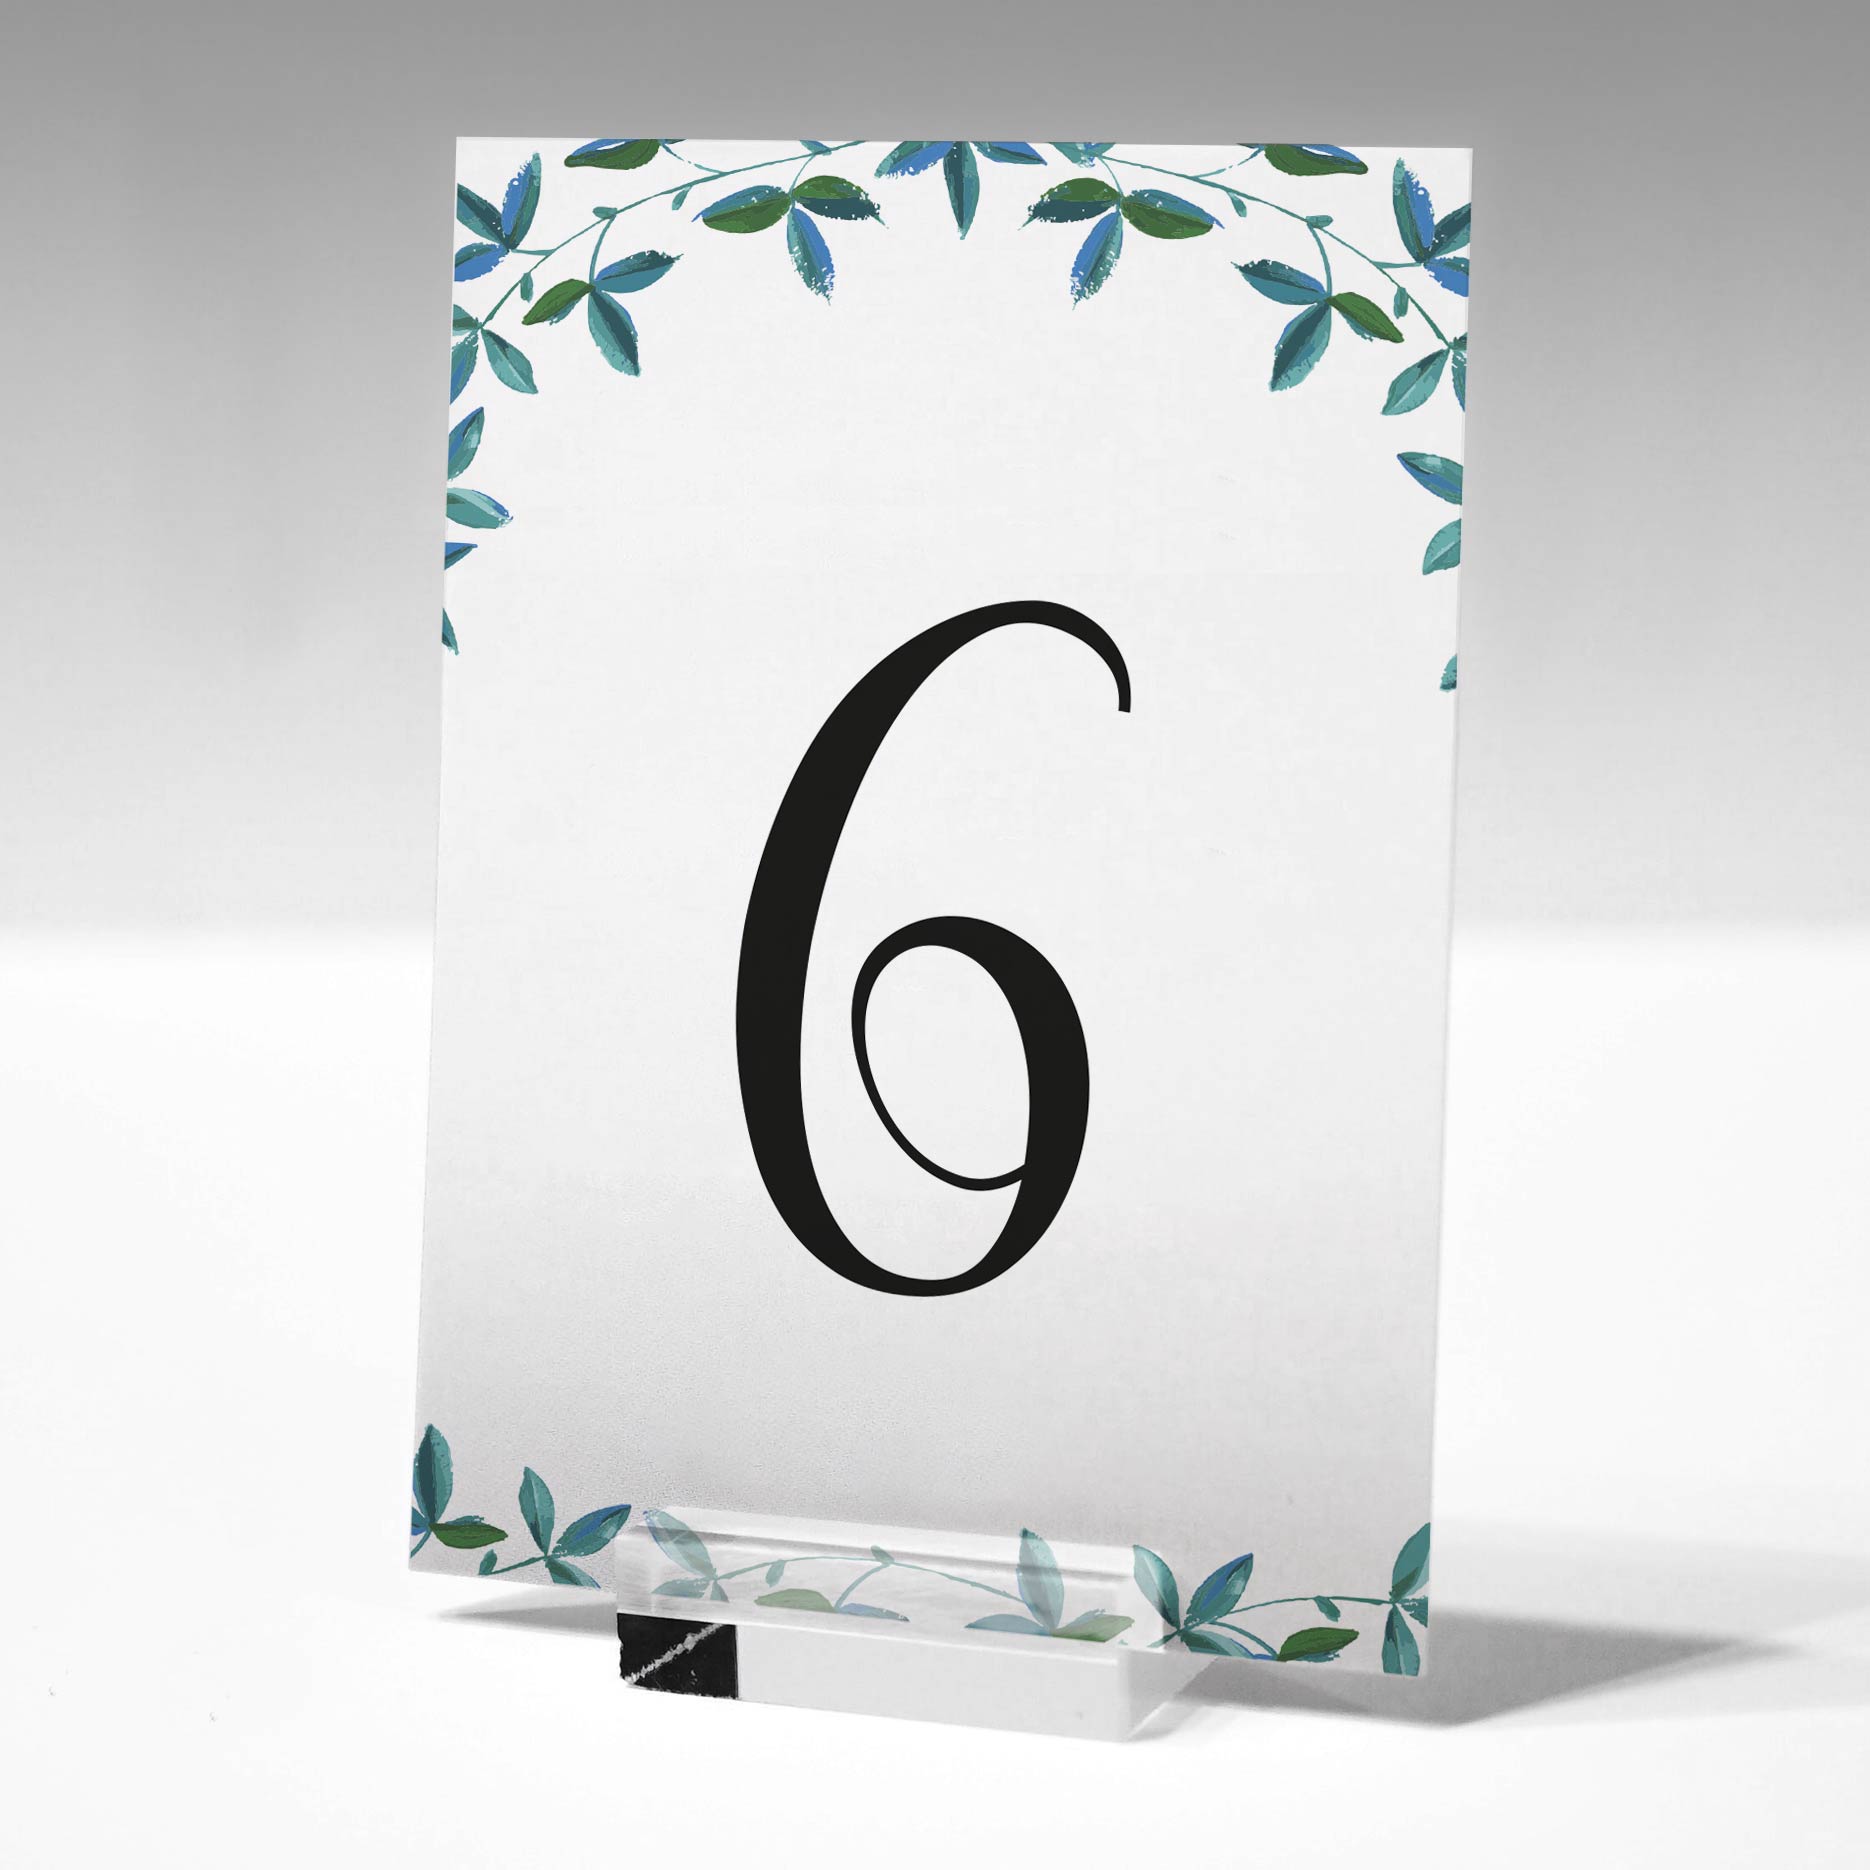 printed green leaves table number in a glass stand